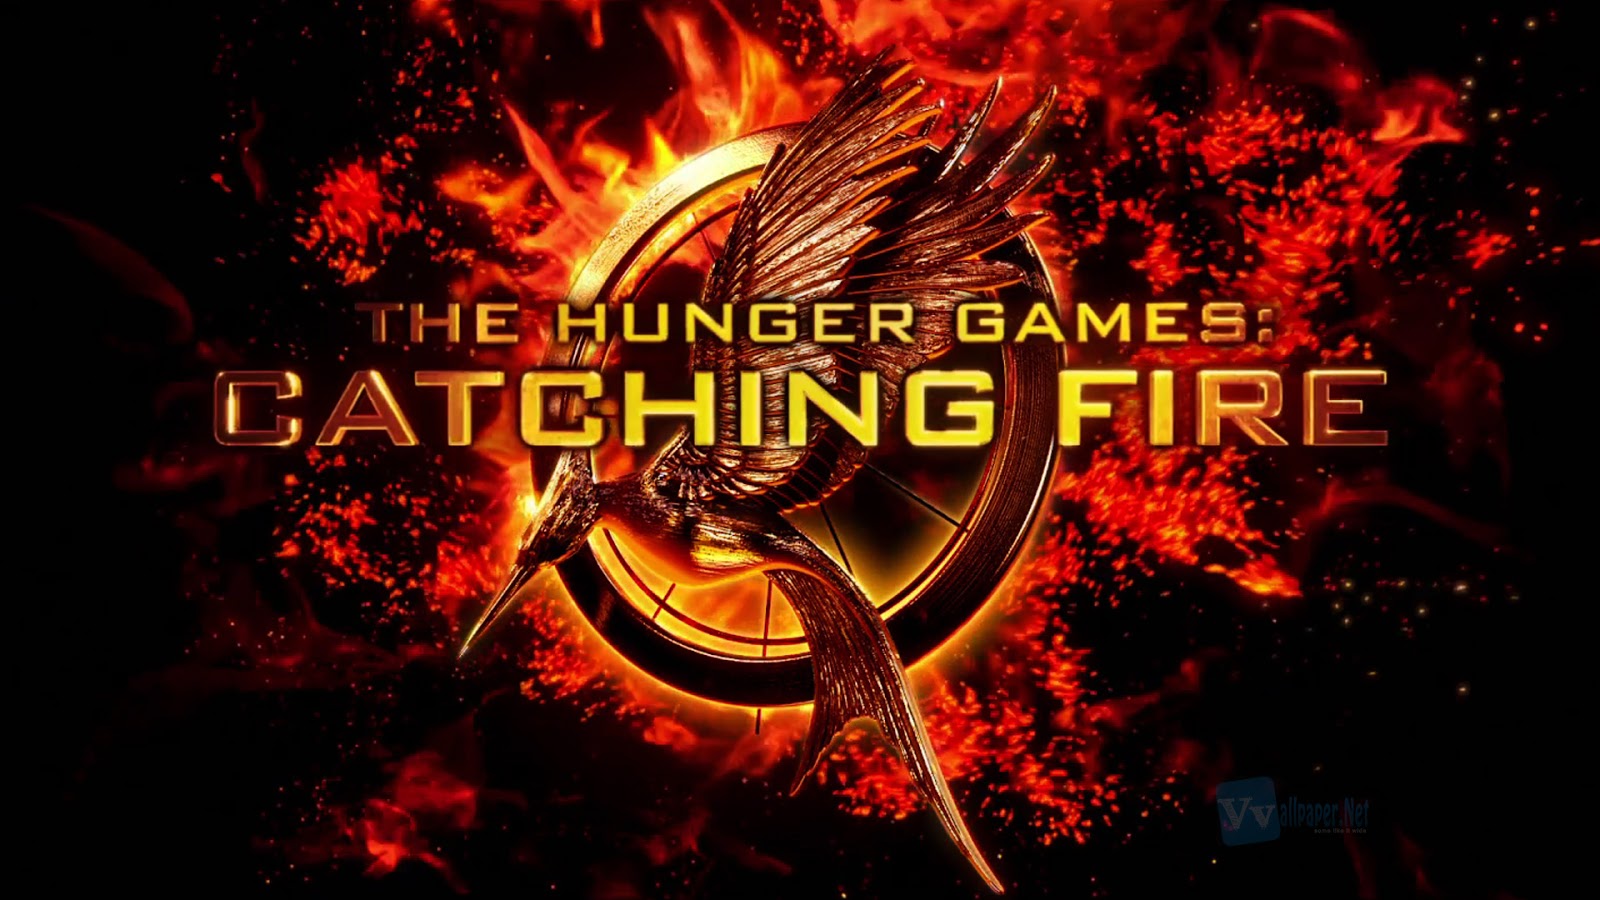 The Hunger Games Catching Fire HD Wallpaper and Character Posters